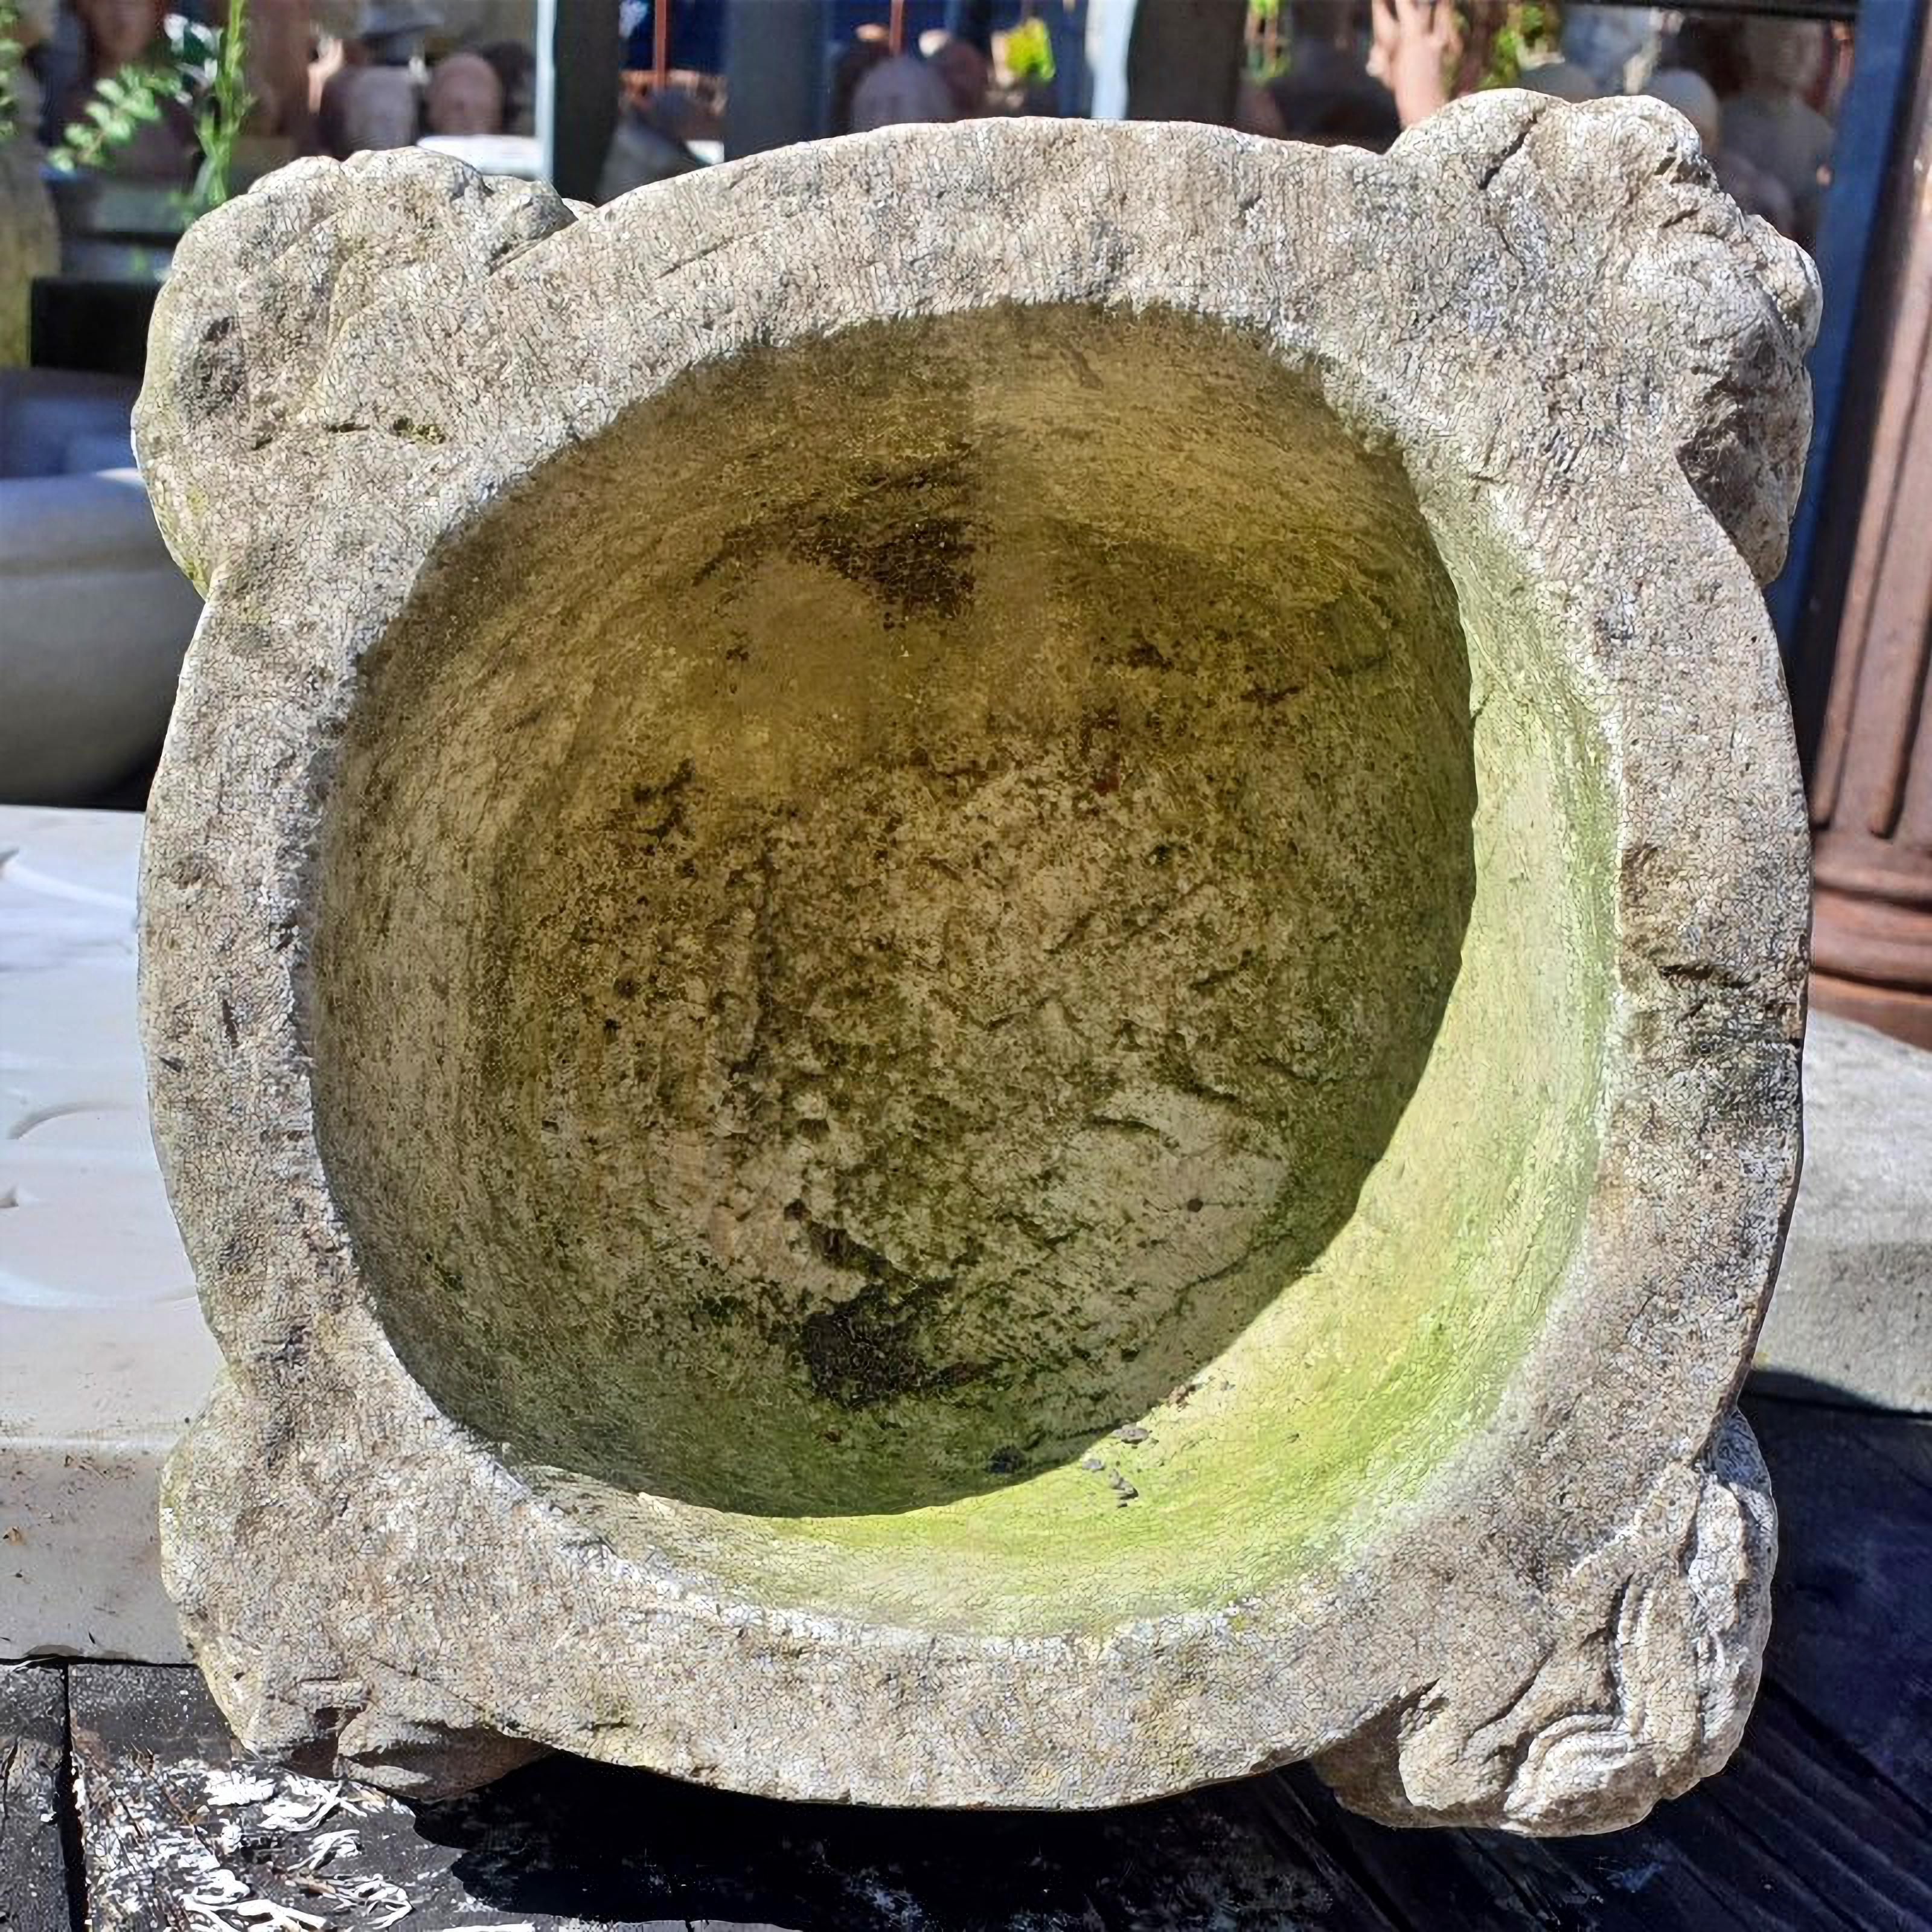 LATE 19th CENTURY ITALIAN STONE MORTAR

Faithful reproduction of a 13th century mortar in light Sannio limestone.

The reproduction was carried out maintaining the original proportions, the 4 ears typical of mortars are created on the tops of 4